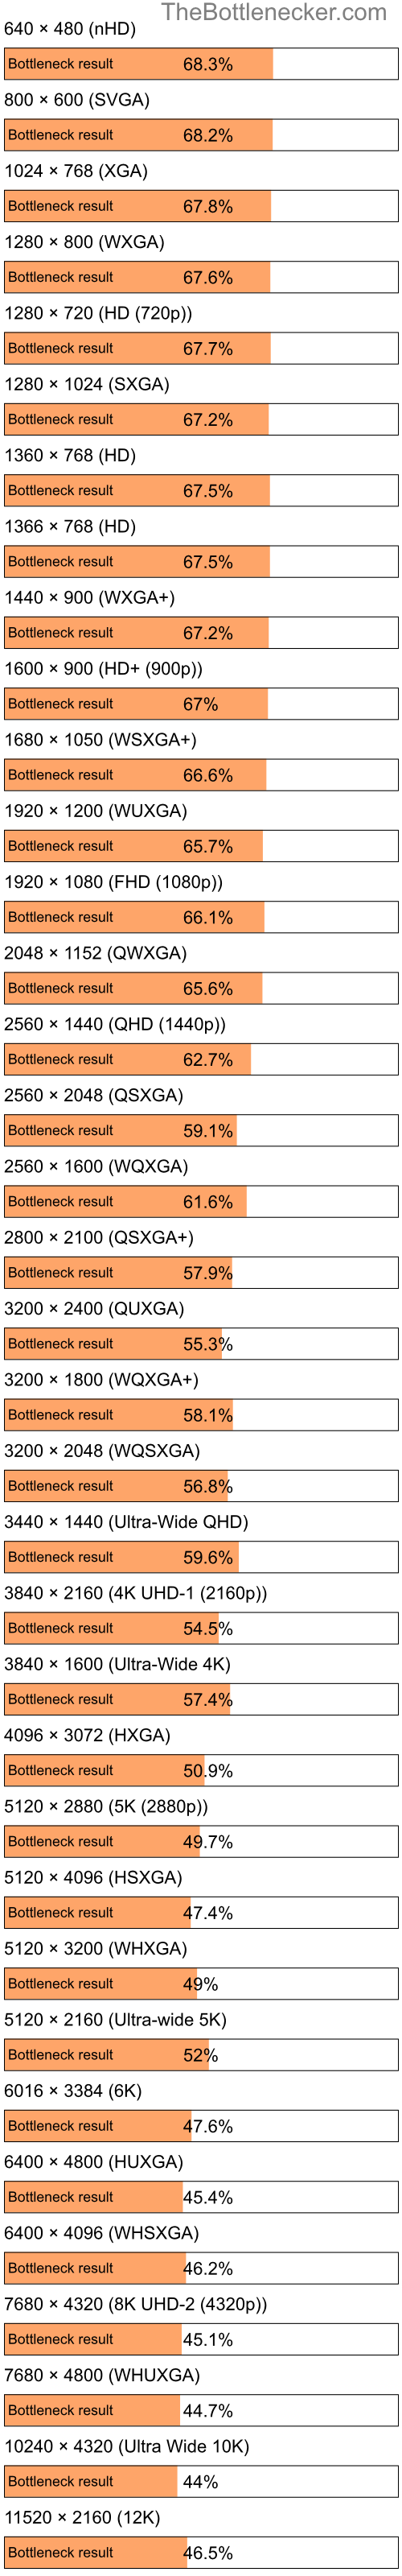 Bottleneck results by resolution for AMD Athlon XP 2000+ and NVIDIA GeForce GTX 1050 Ti in Graphic Card Intense Tasks